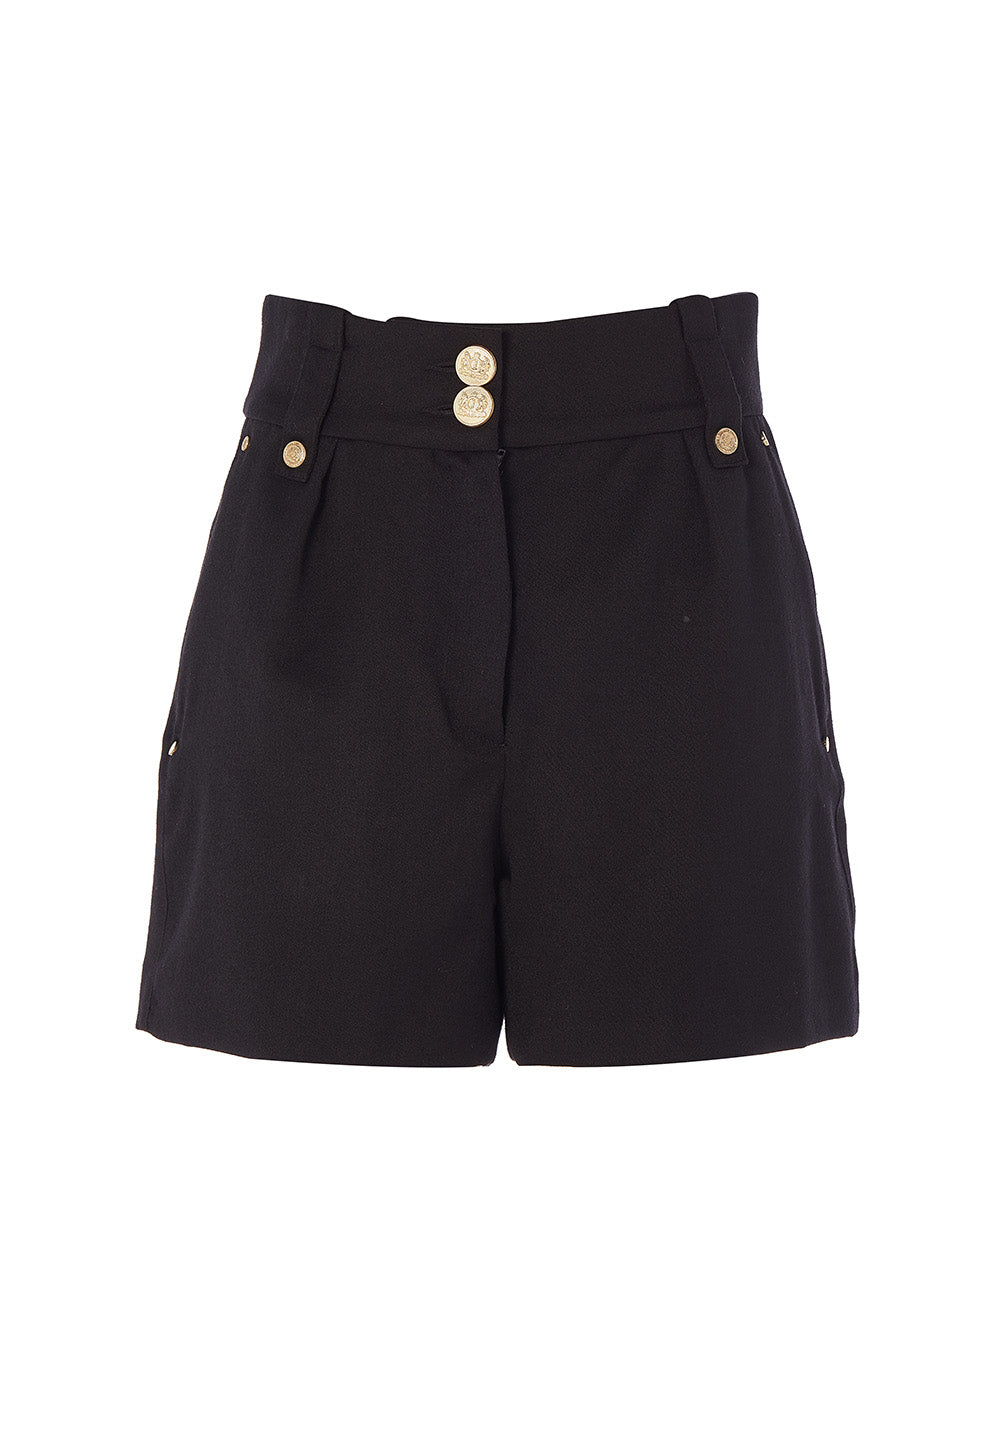 Luxe Tailored Short - Black sold by Angel Divine